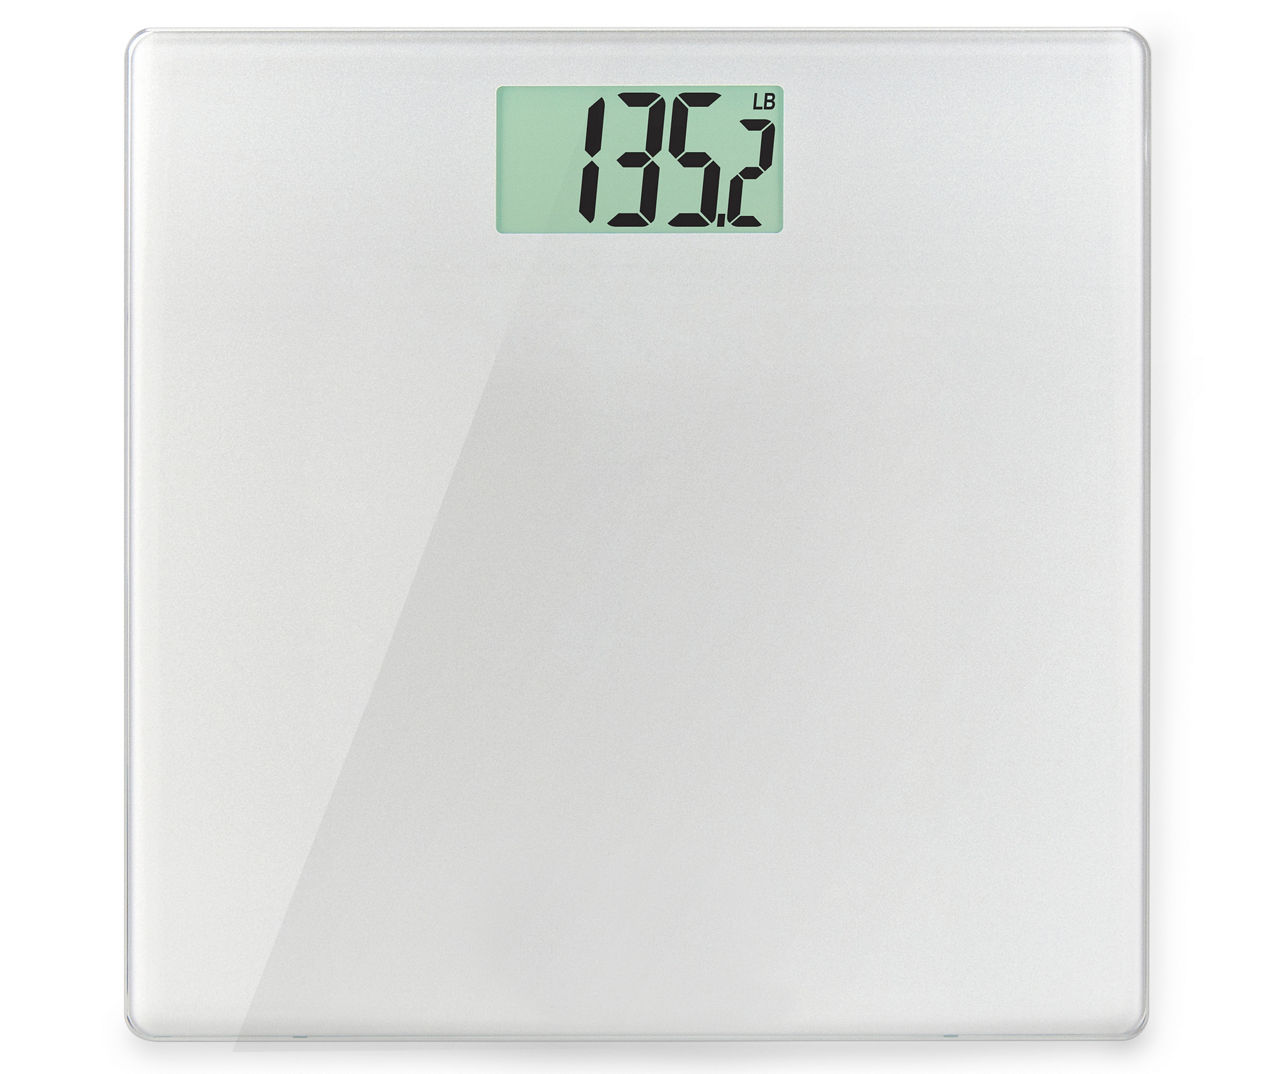 Bathroom Weighing Scale Buy at Best Price- 5 Core  Digital weight scale, Body  weight, Body weight scale